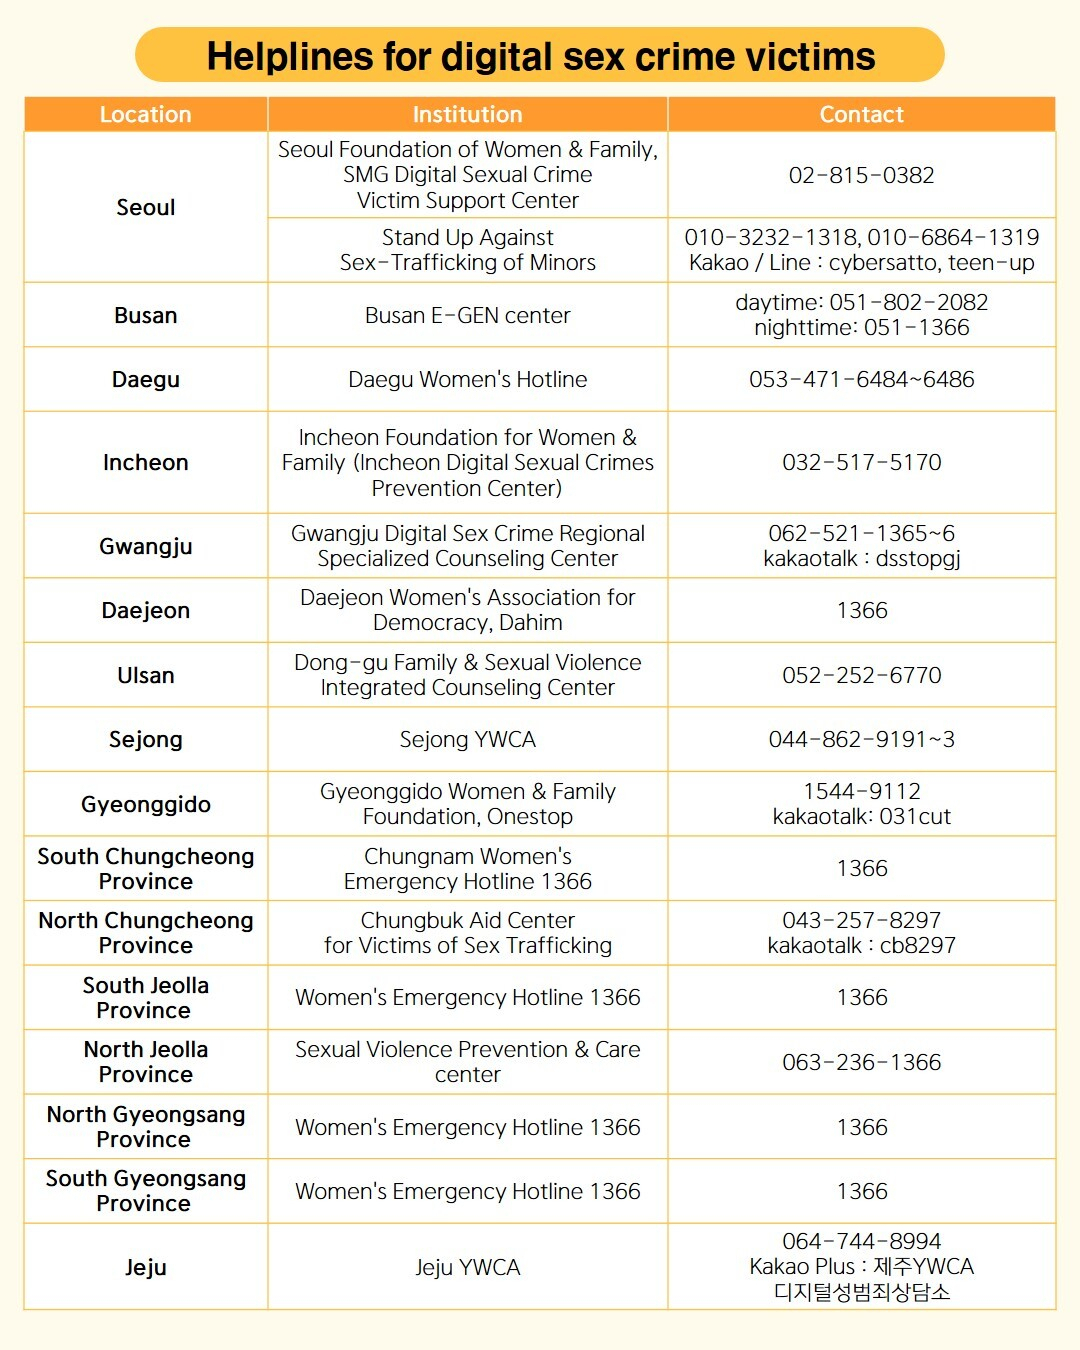 A list of designated institutions and organizations that will aid digital sex crime victims in taking down abusive materials starting Jan. 1, 2023. (The Korea Herald)